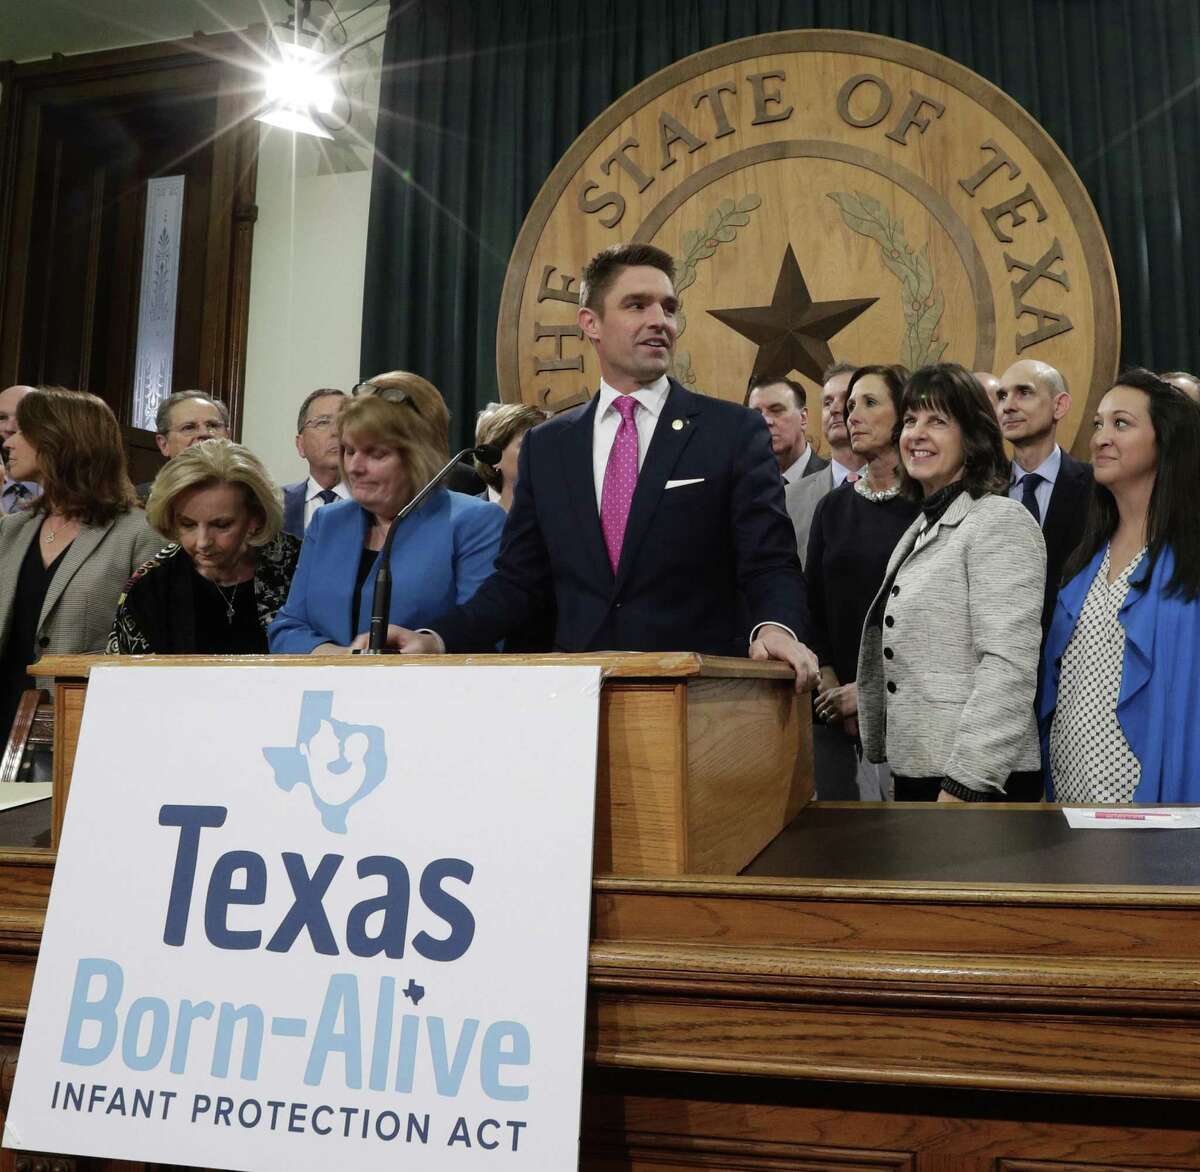 FILE - In this March 7, 2019 file photo, State Rep. Jeff Leach, at podium, stands with fellow lawmakers and guests to talk about the Texas Born-Alive bill, in Austin, Texas. Leach, a Republican lawmaker is blocking a bill that would allow the death penalty for women seeking abortions says local authorities are monitoring his home near Dallas. A Texas sheriff's department said Thursday, April 11, 2019 it had "security concerns" over social media posts targeting Leach, who has come under fire by some conservative activists after blocking a bill that could lead to a woman being charged with homicide if she has an abortion. (AP Photo/Eric Gay, File)